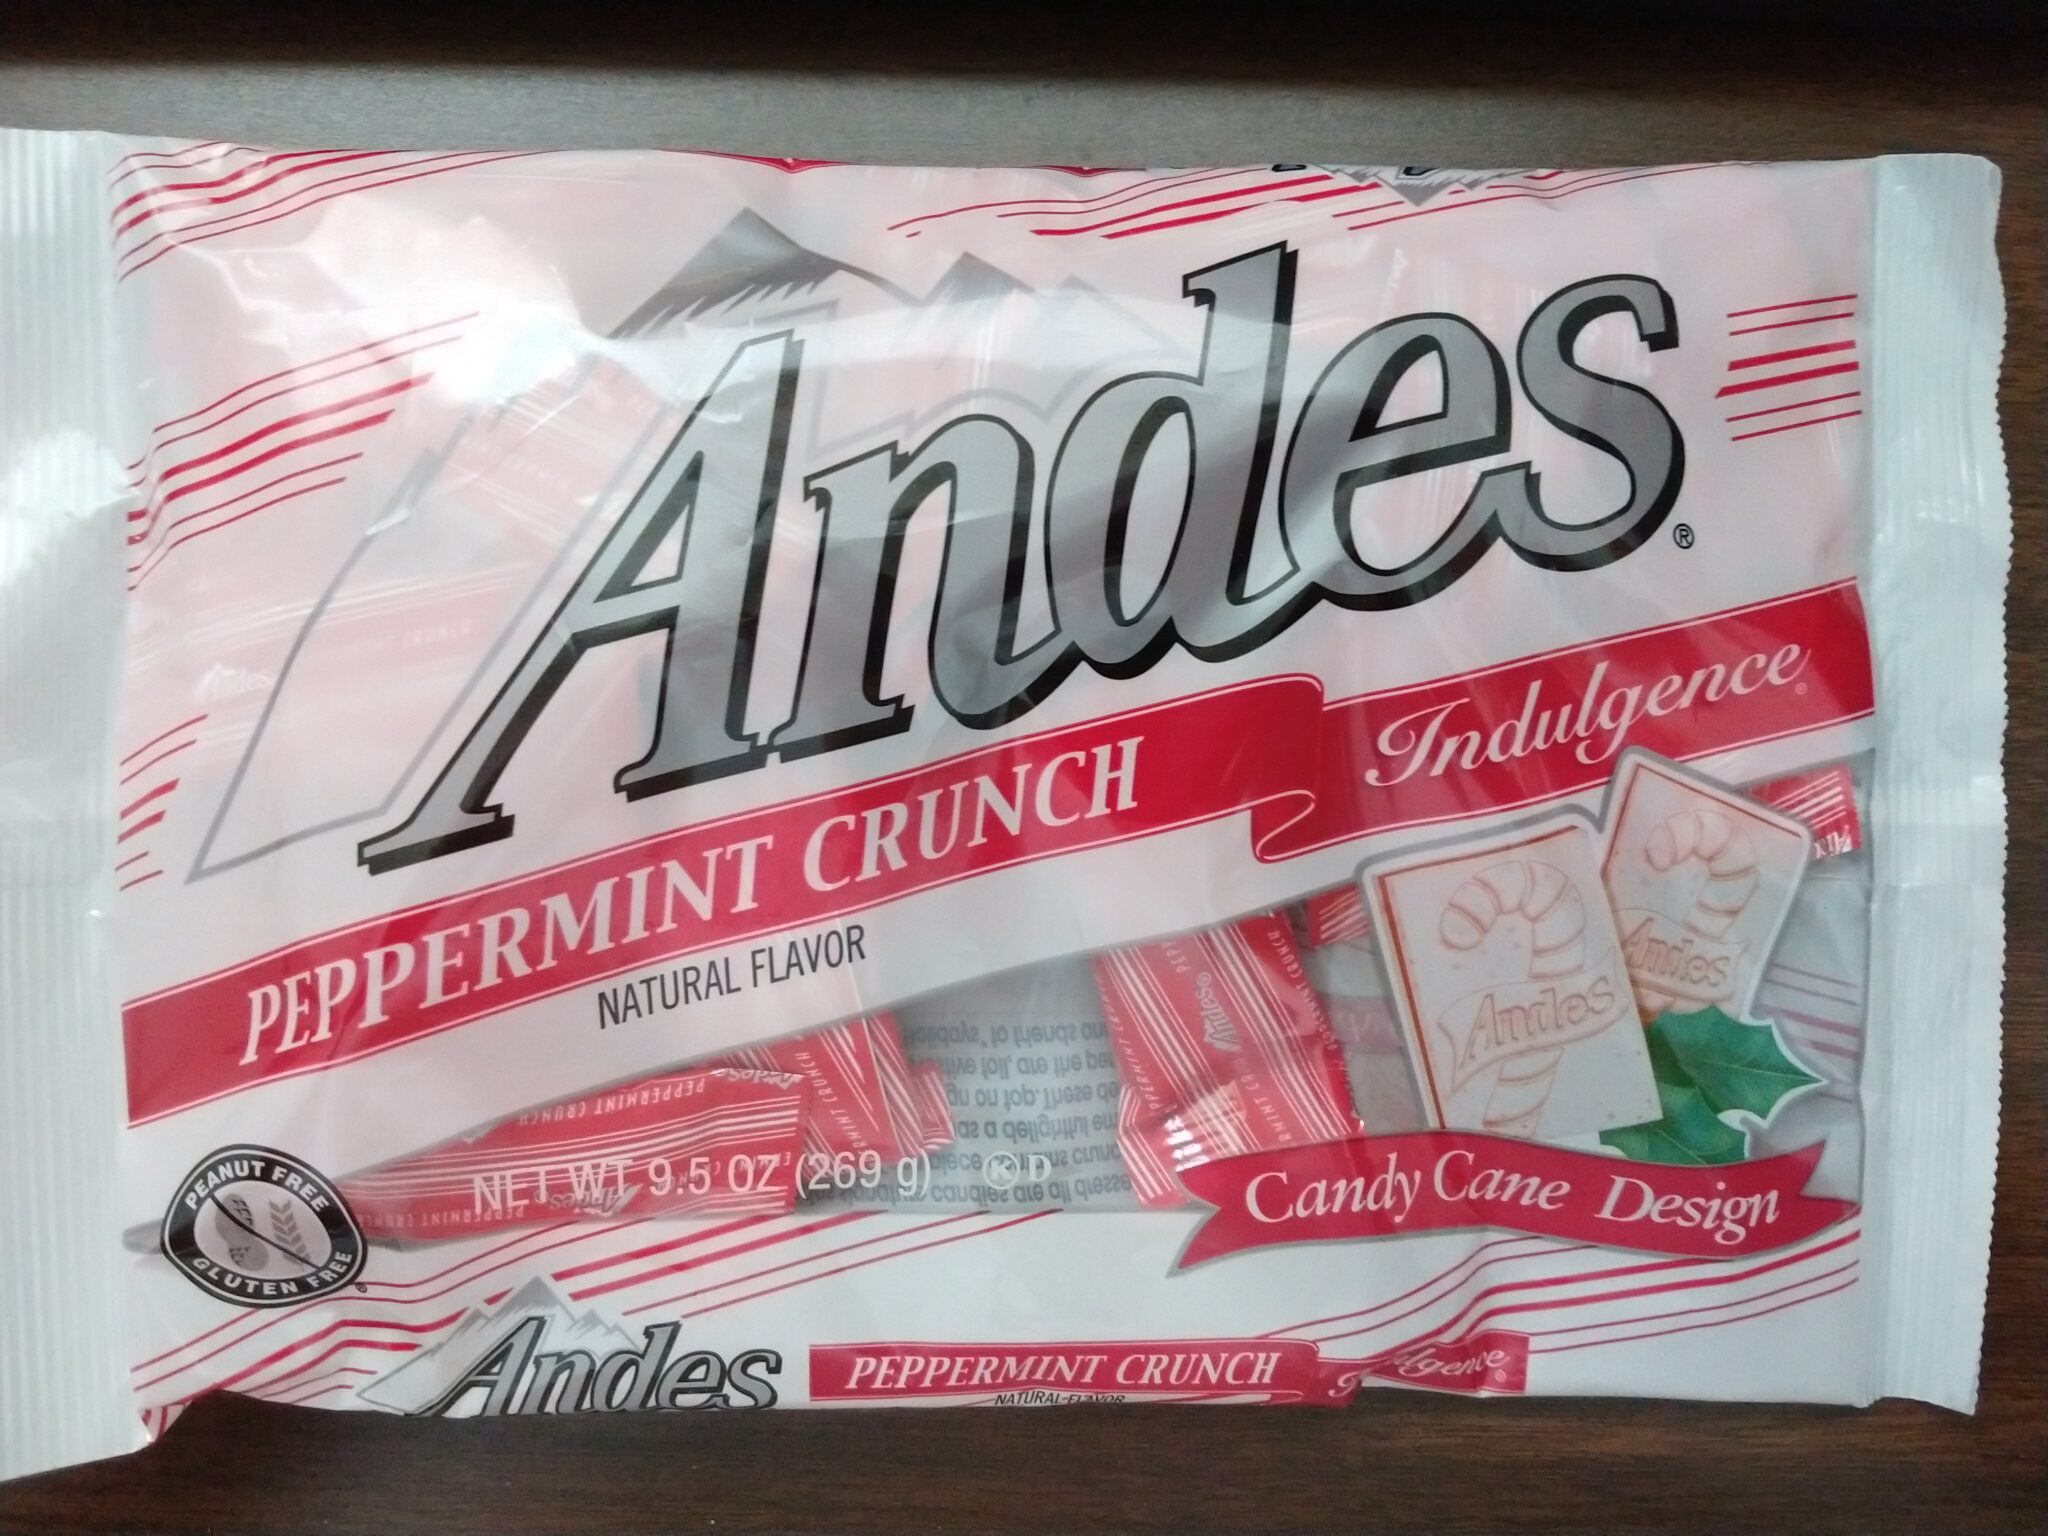 Andes – Peppermint Crunch